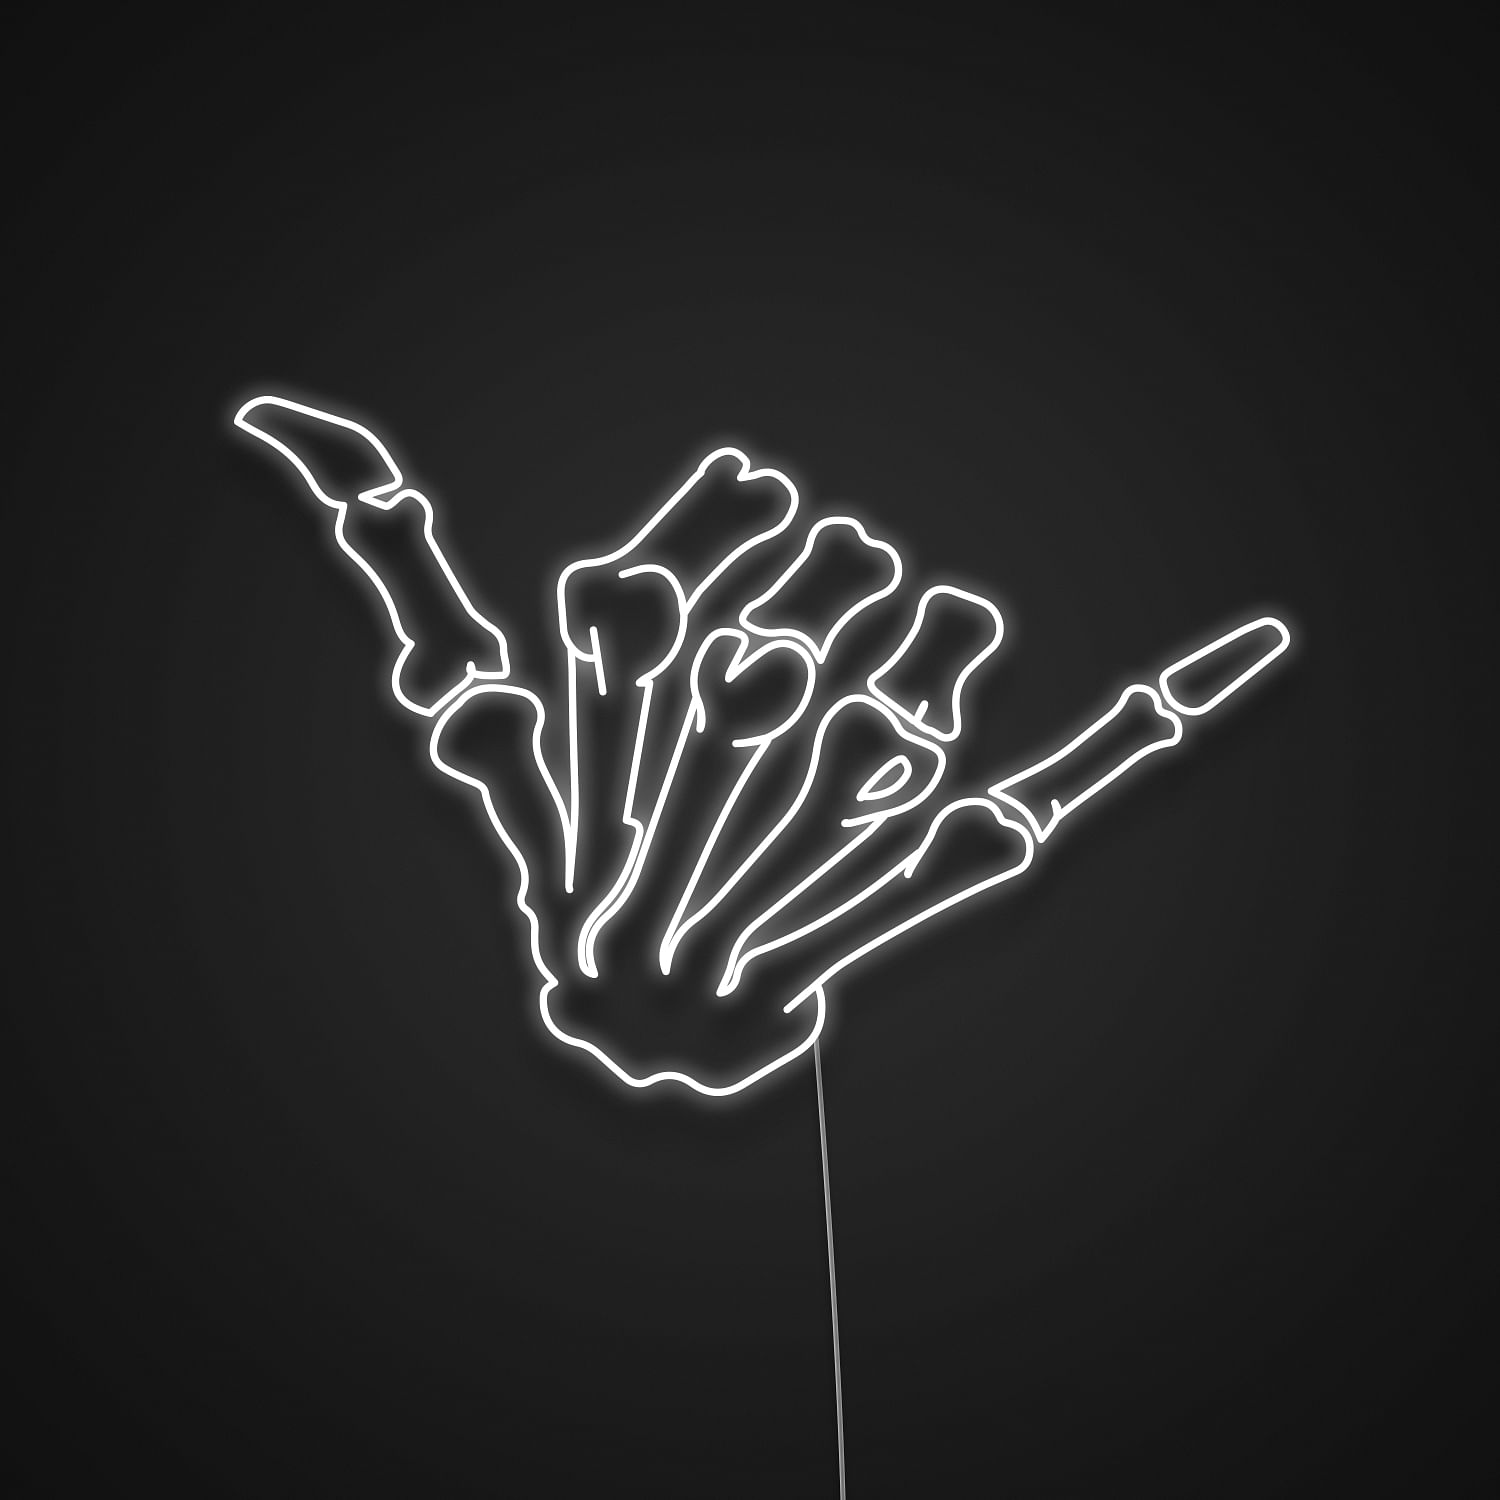 Hang Loose Skeleton Hand Neon Sign | Designed by Neonize